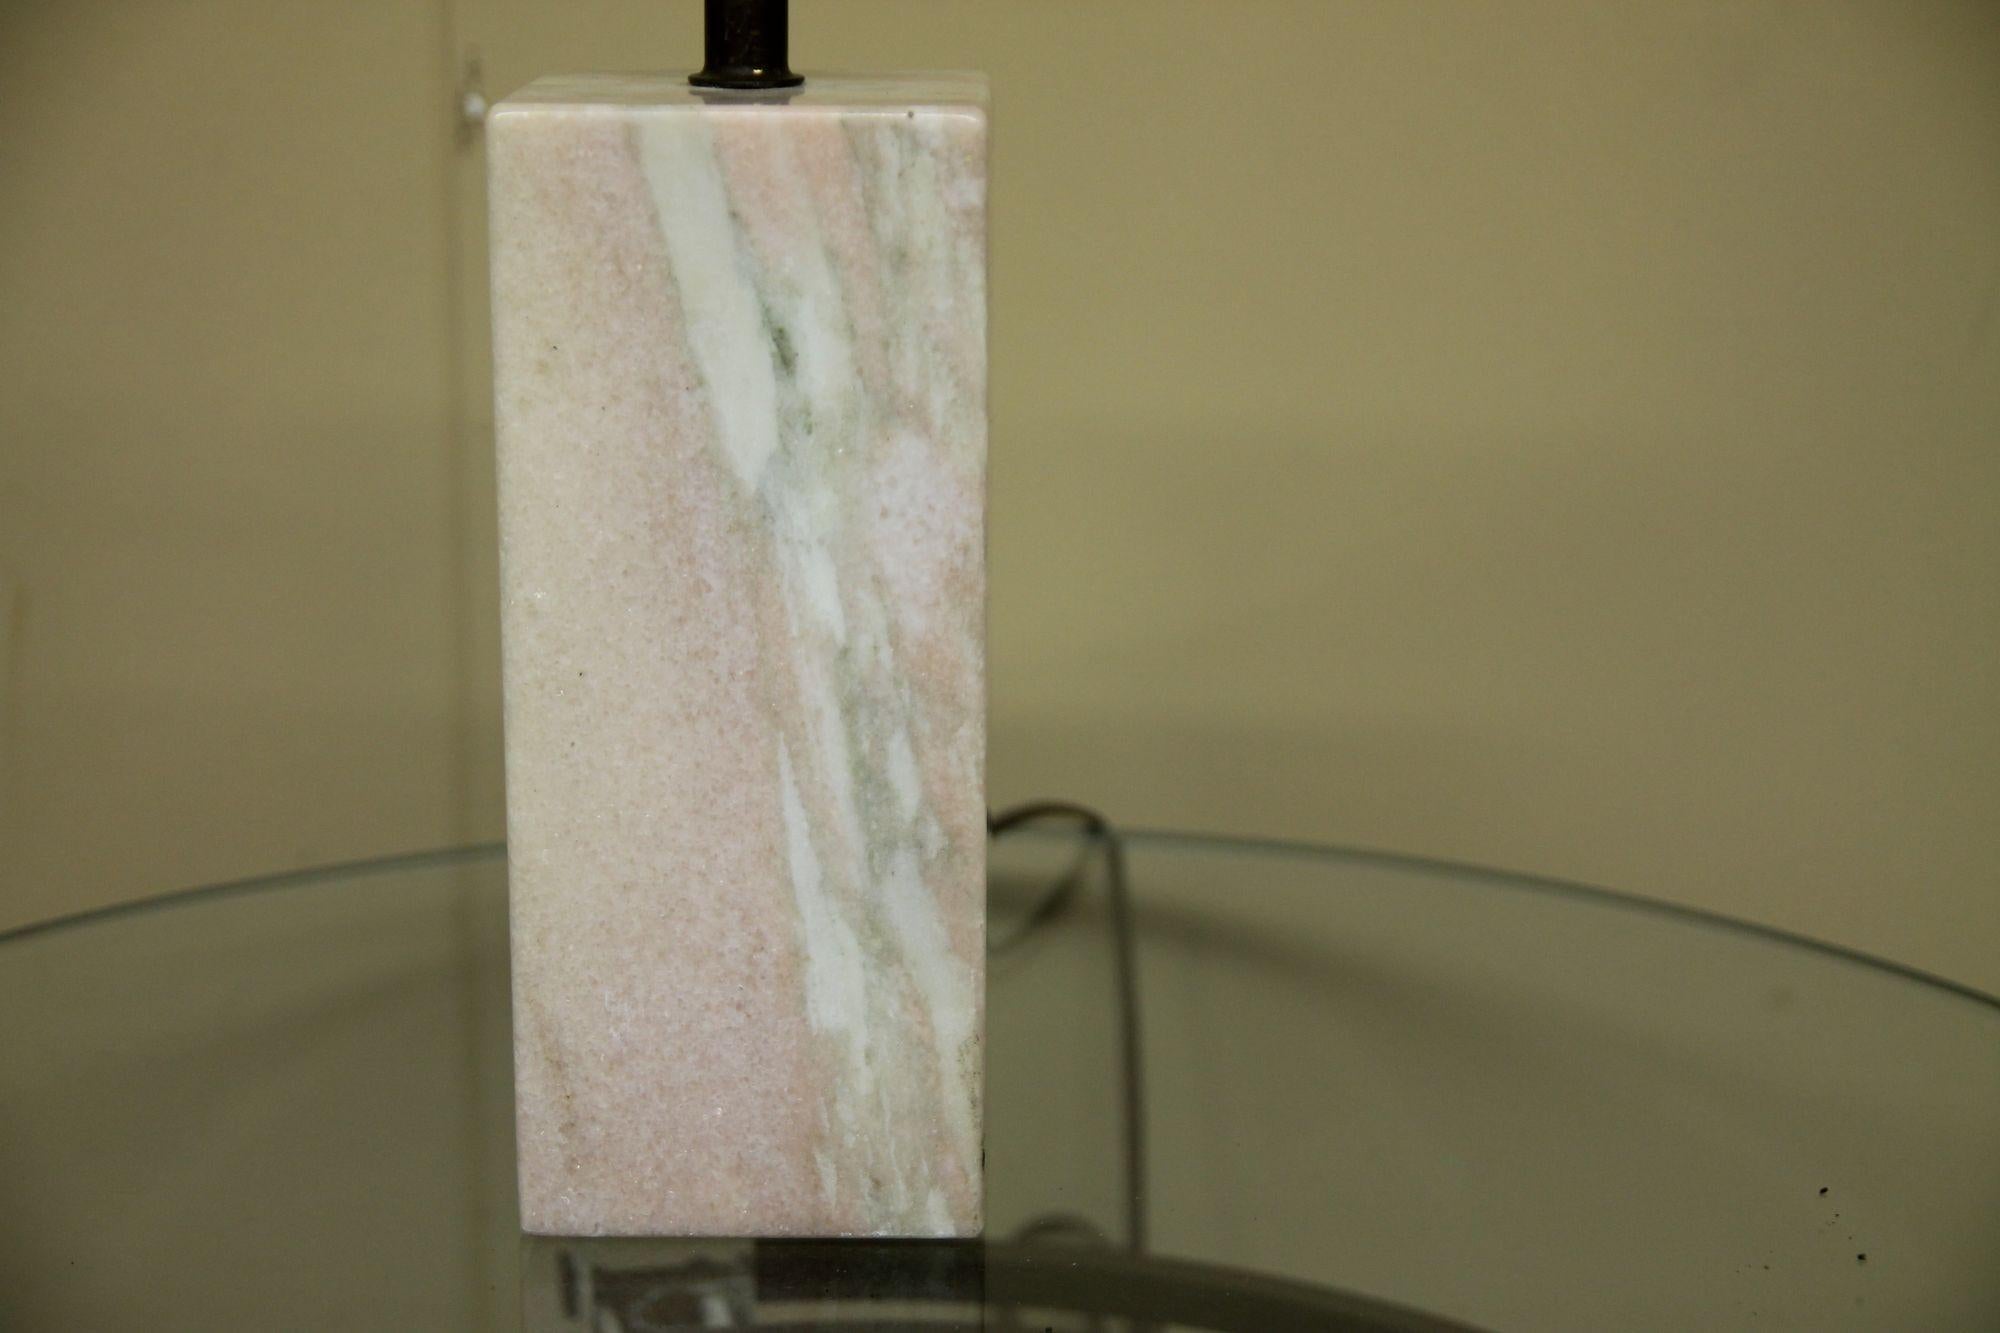 Pleased to offer this pink marble table lamp. This smaller size lamp is in nice vintage shape. The lamp will look great with a light color shade.